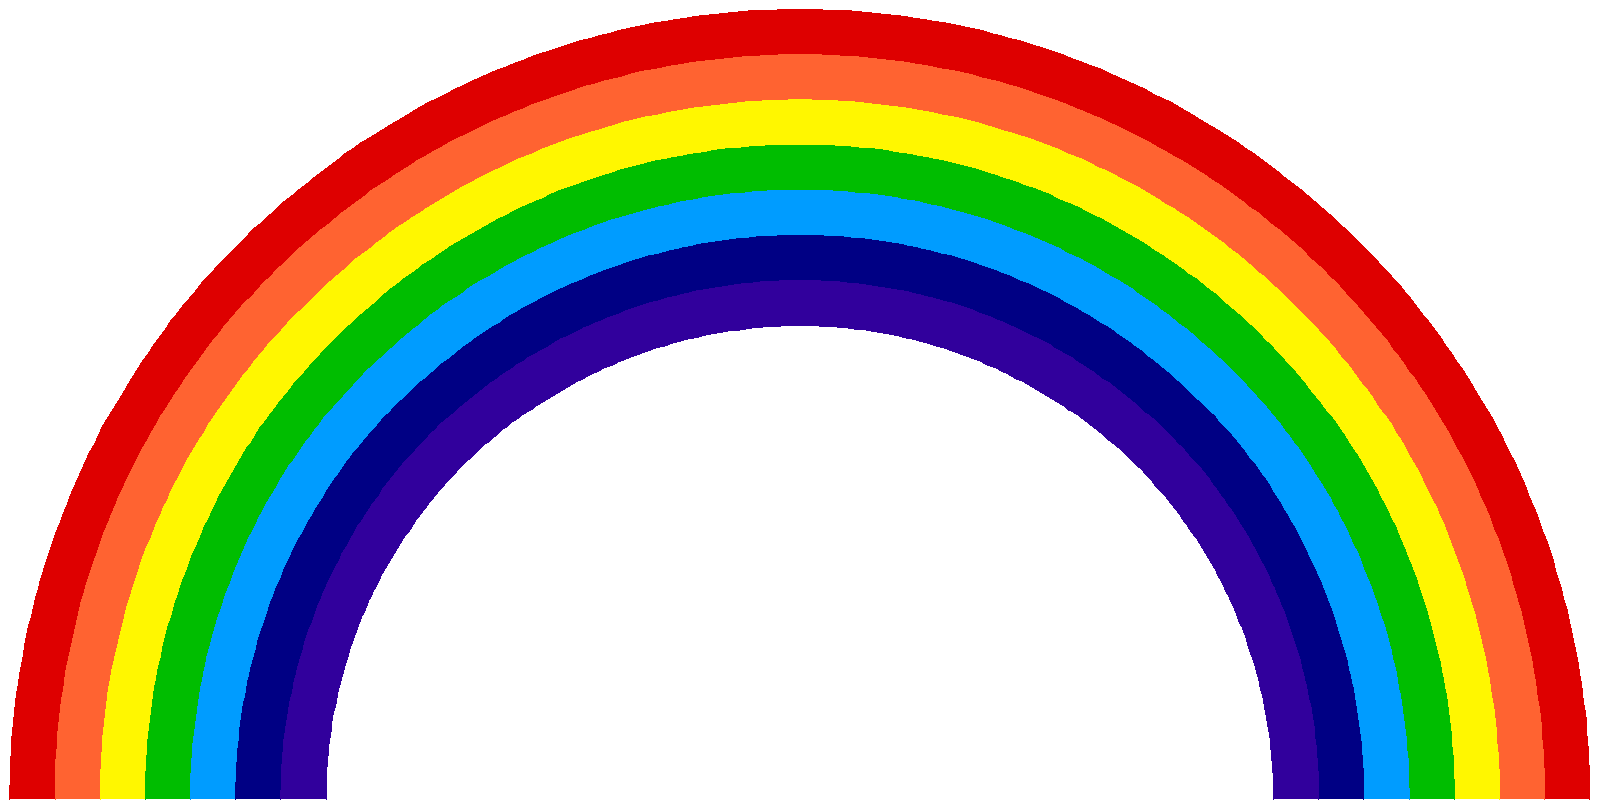 free rainbow clipart images - photo #8